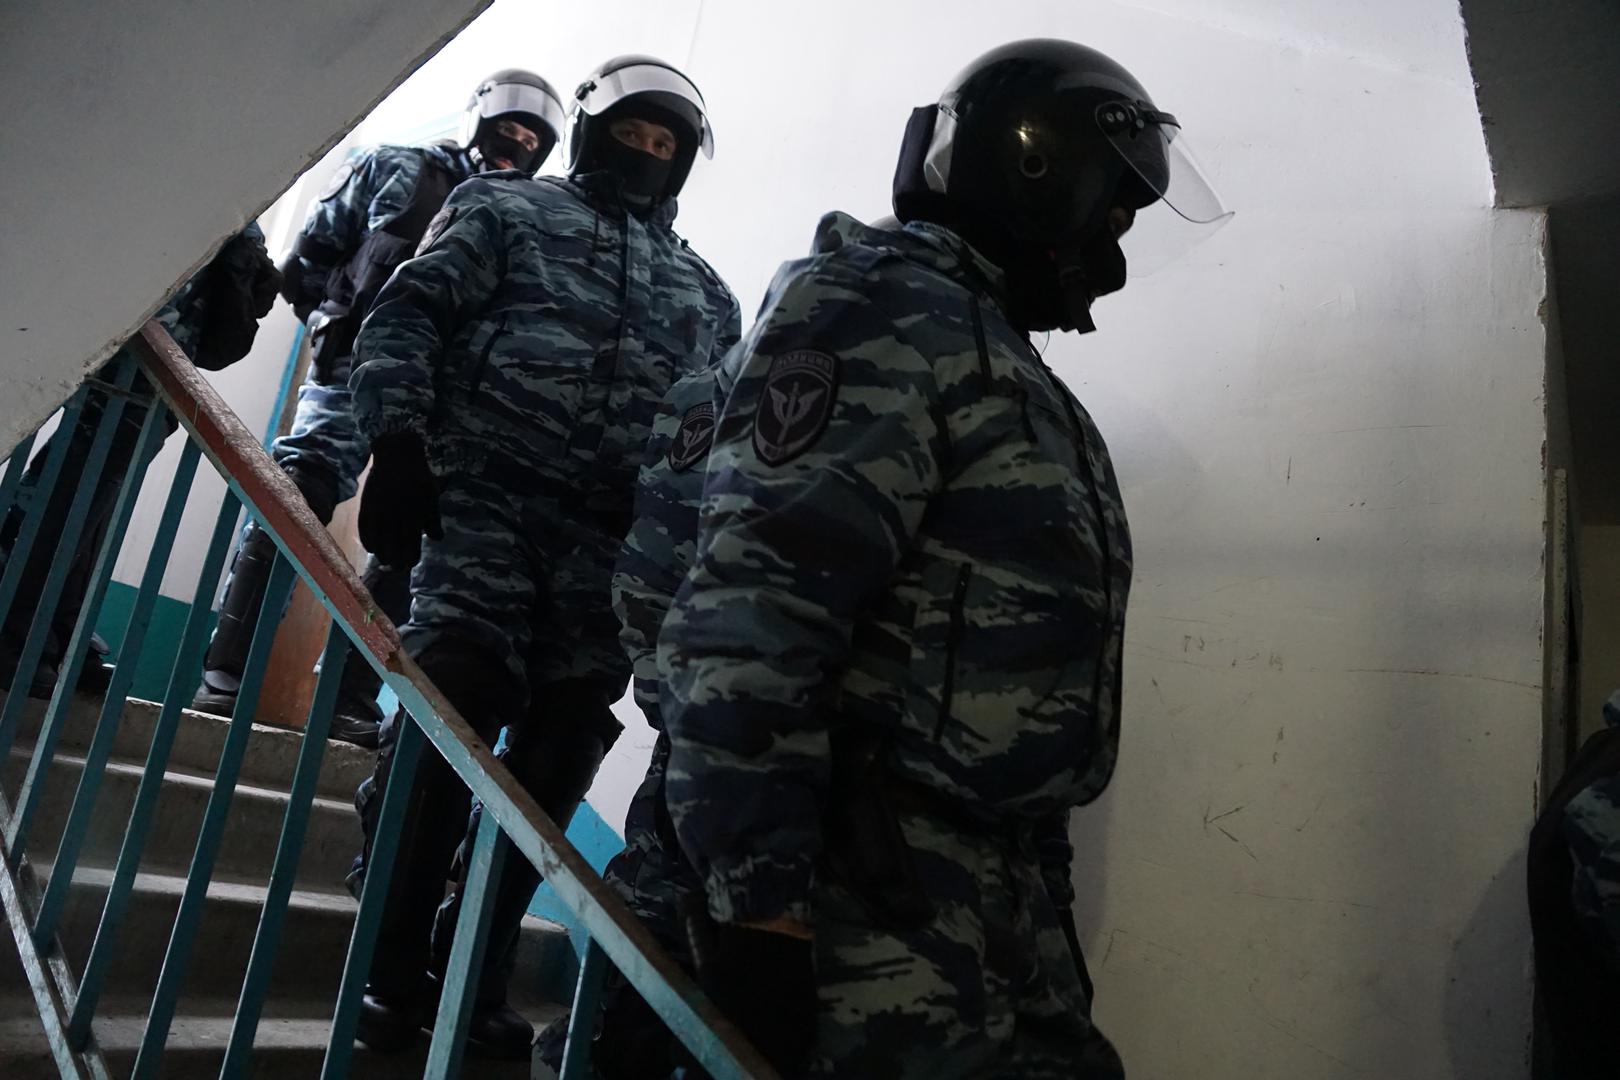 Law enforcement officials during the search in Emil Kurbedinovâs office, Bakhchysarai, Crimea, January 26, 2017.